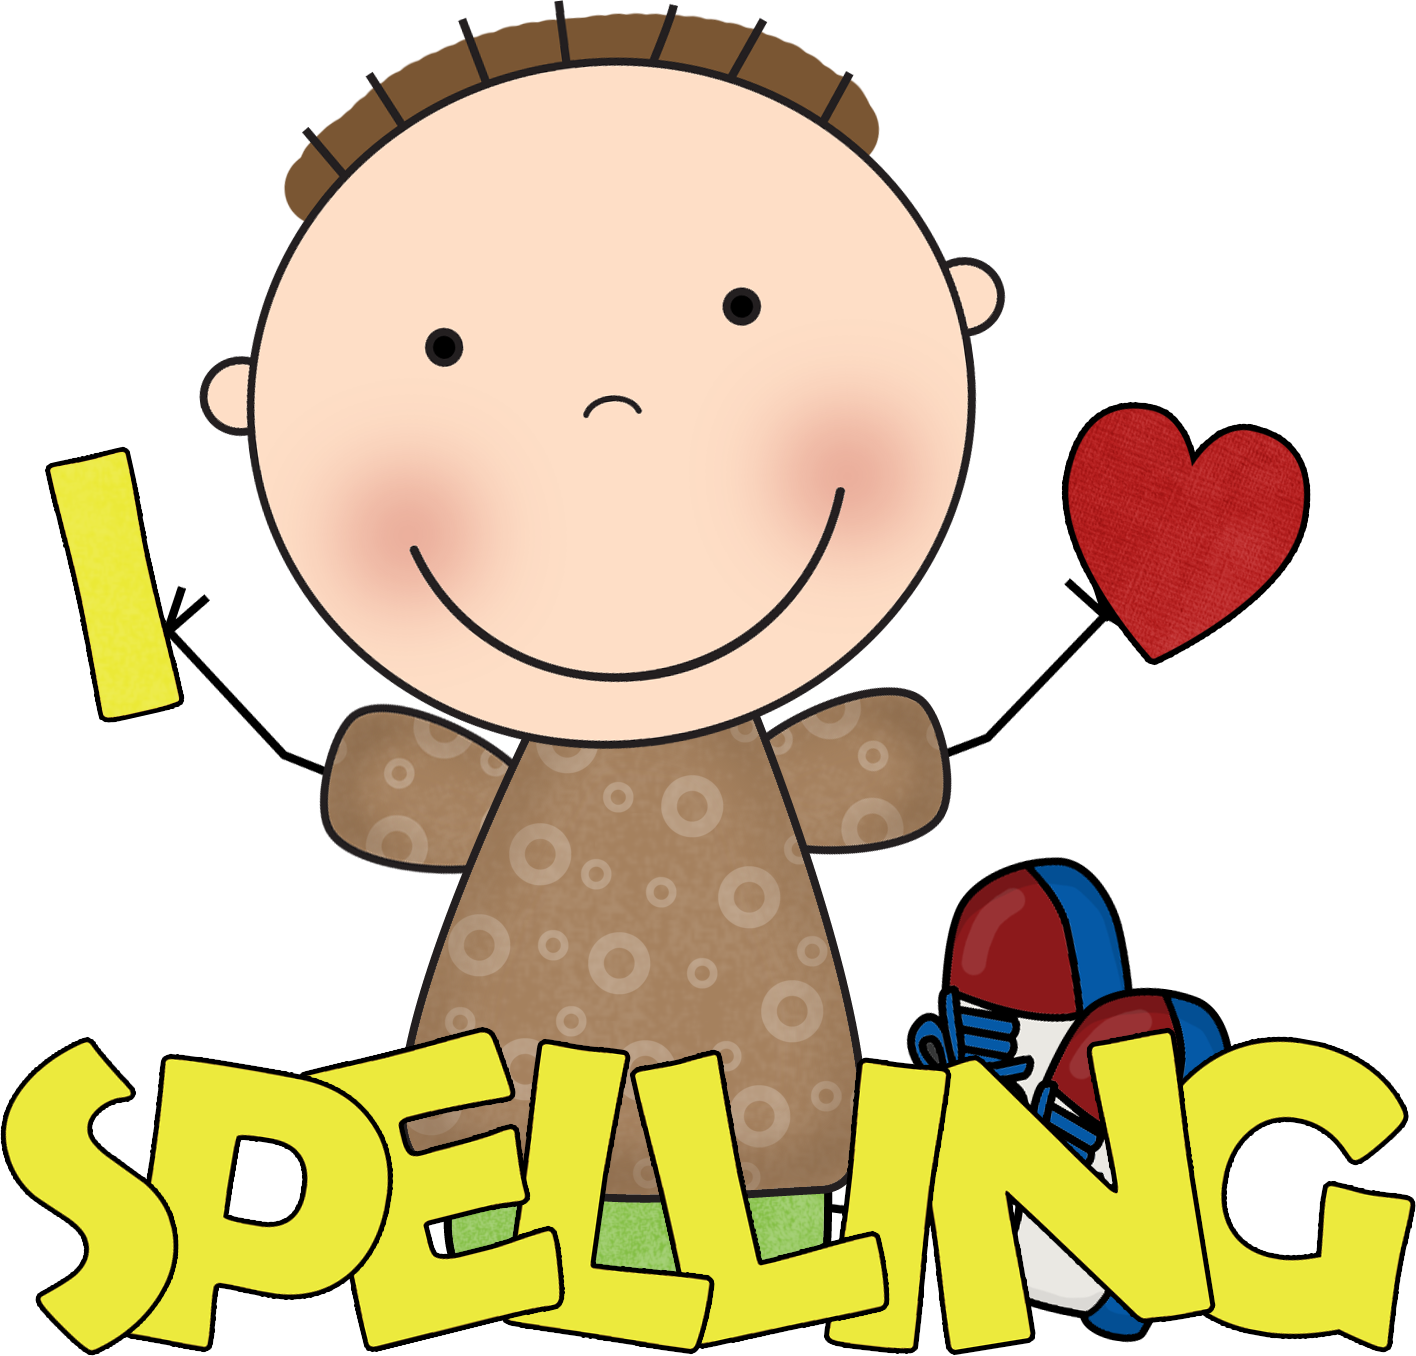 Spelling Center Clipart - Free Clipart Images